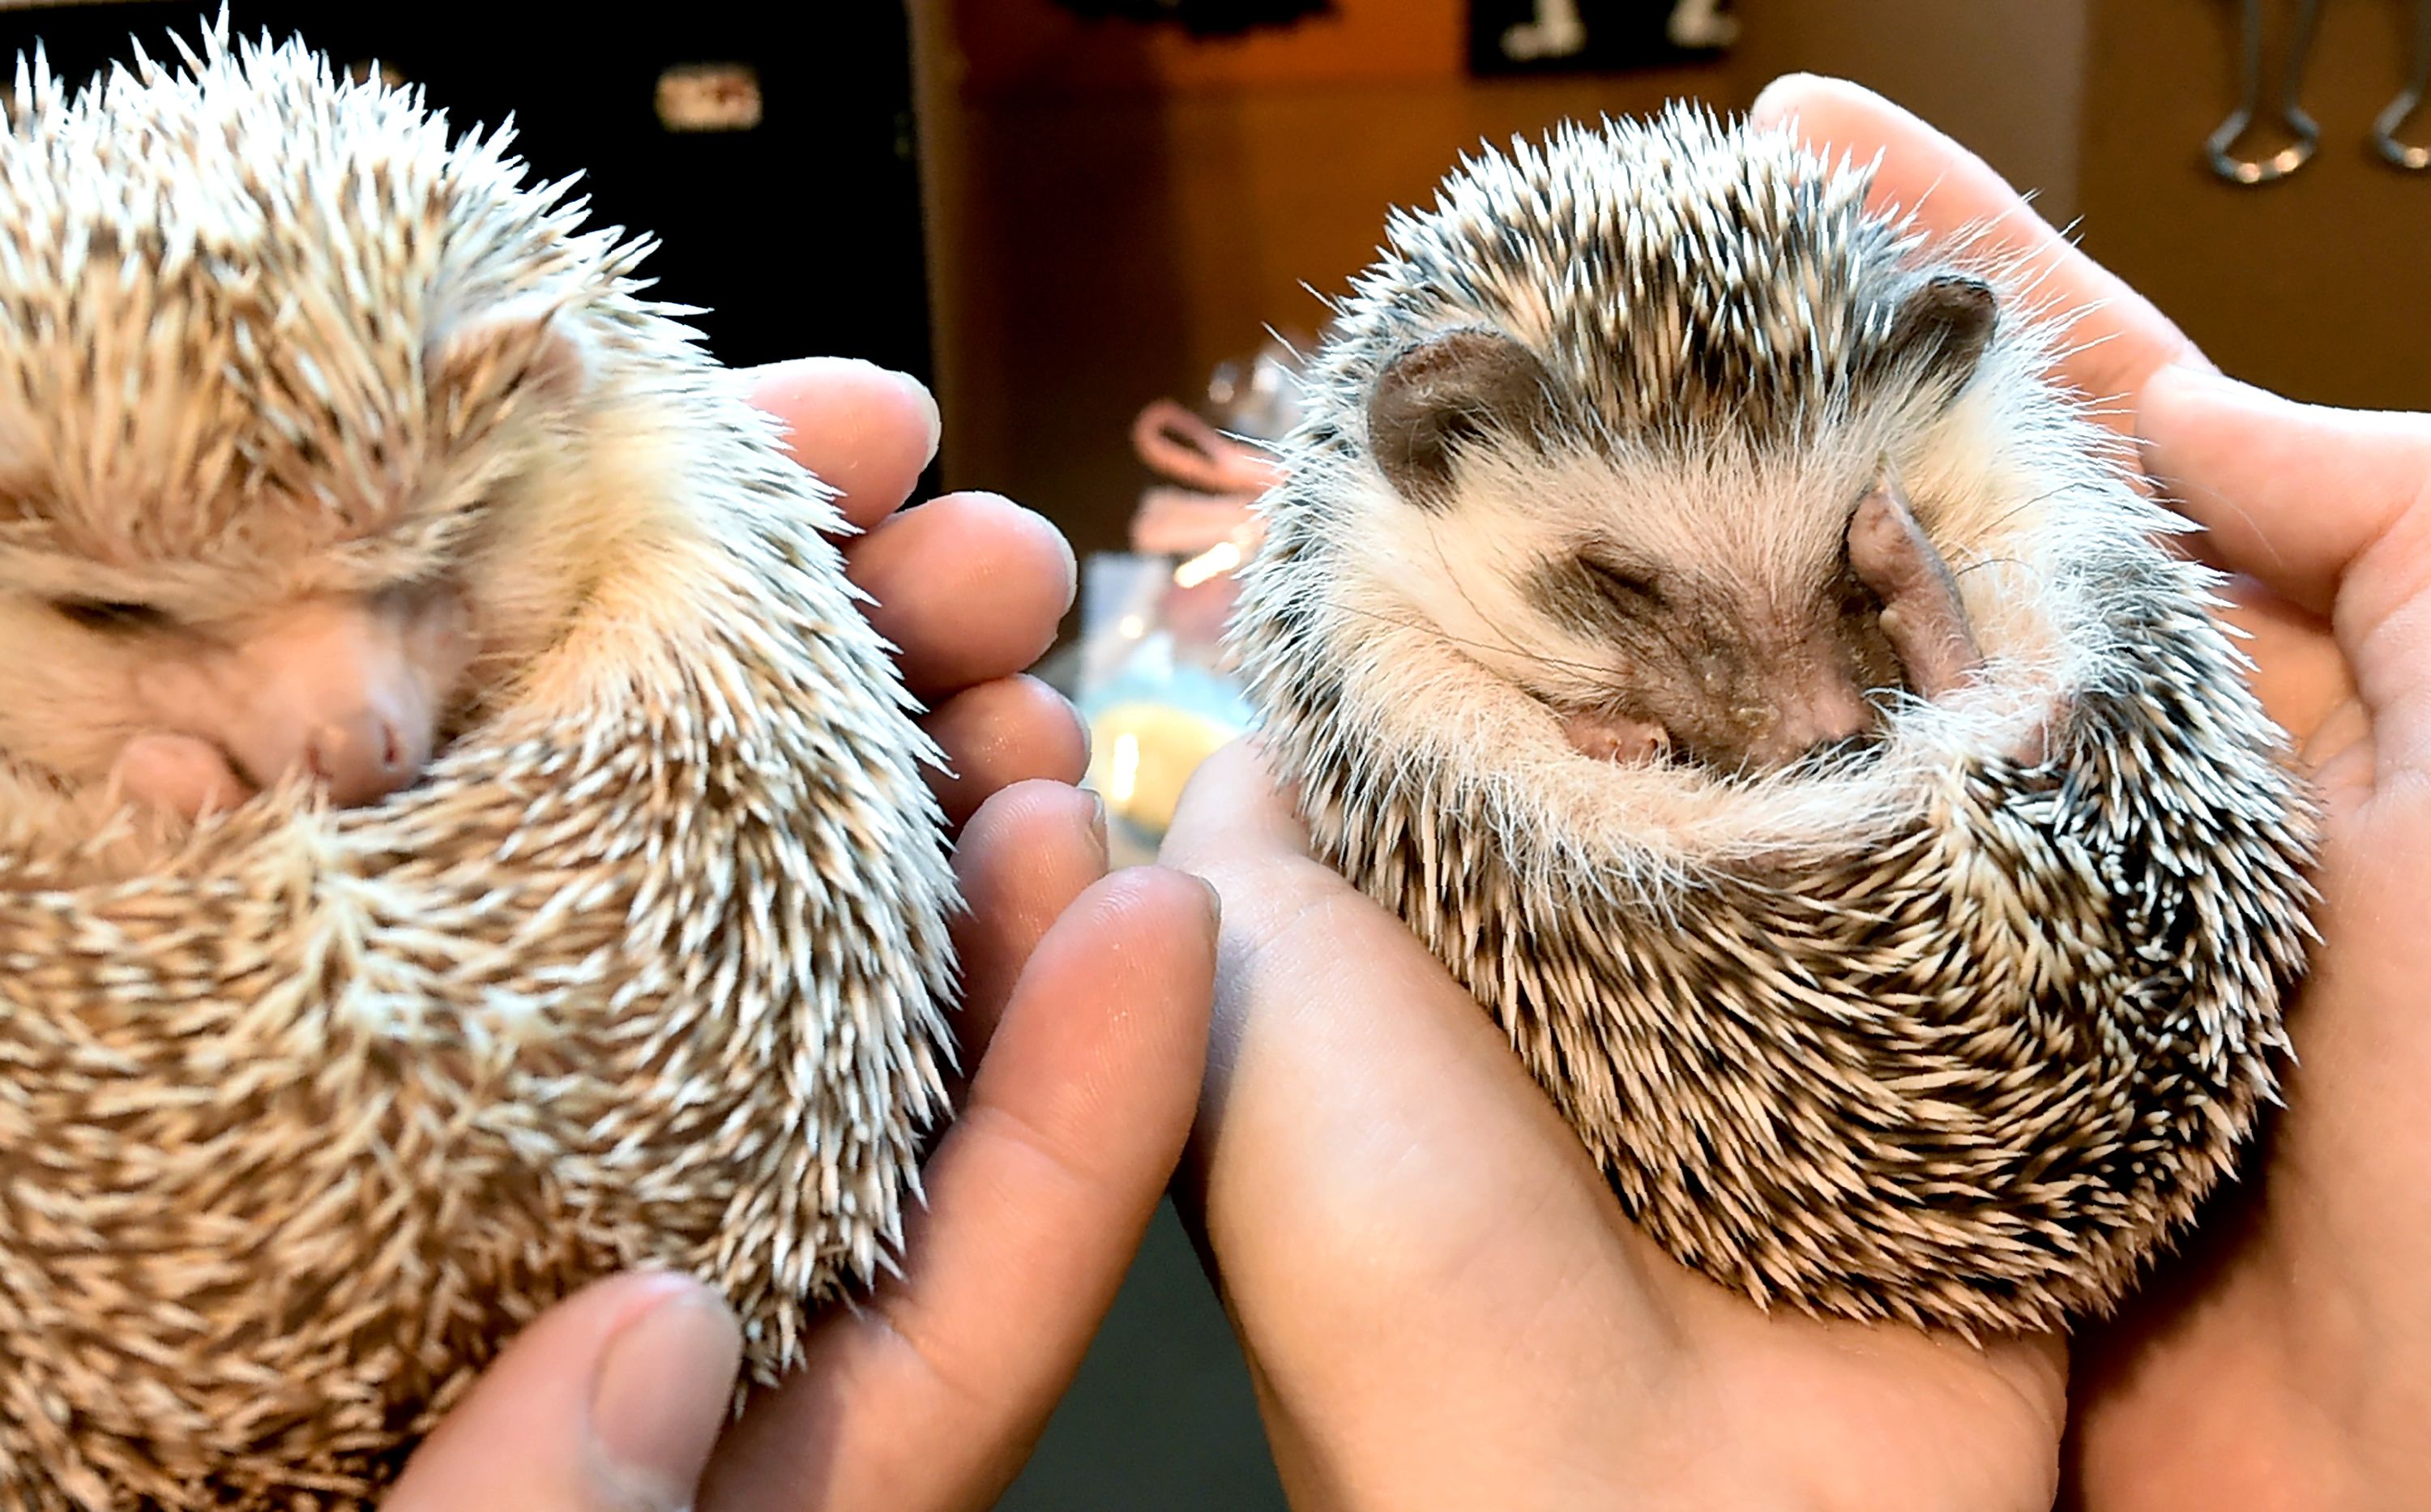 Up to 60 per cent of hedgehogs are thought to carry a type of MRSA